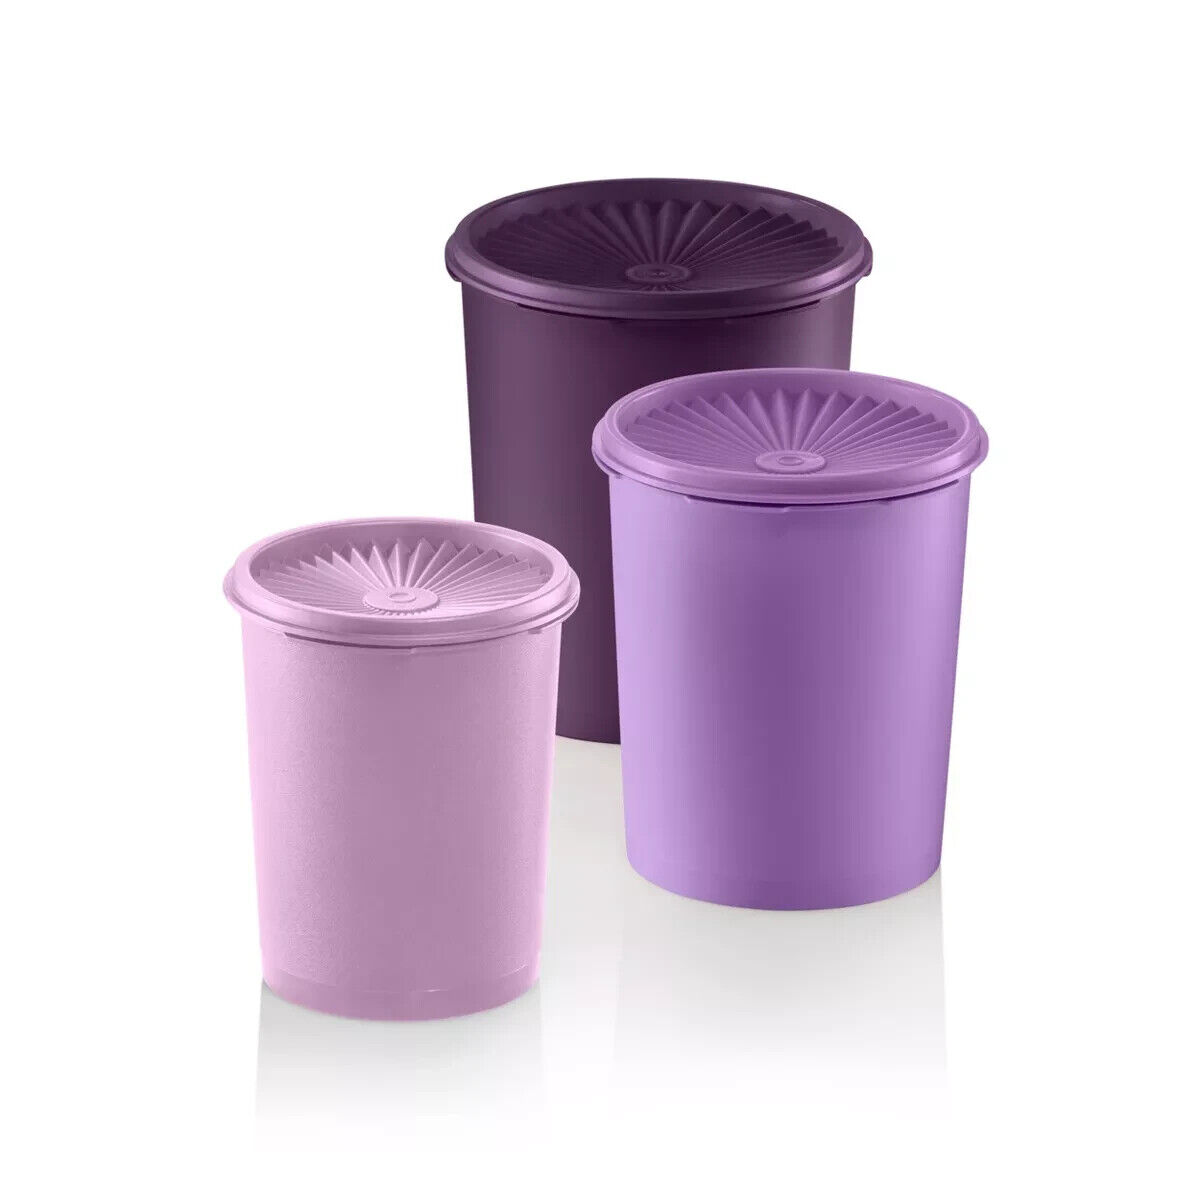 Set of 3 NEW Tupperware Purple Lavender Pink Round Servalier Canisters w/lids